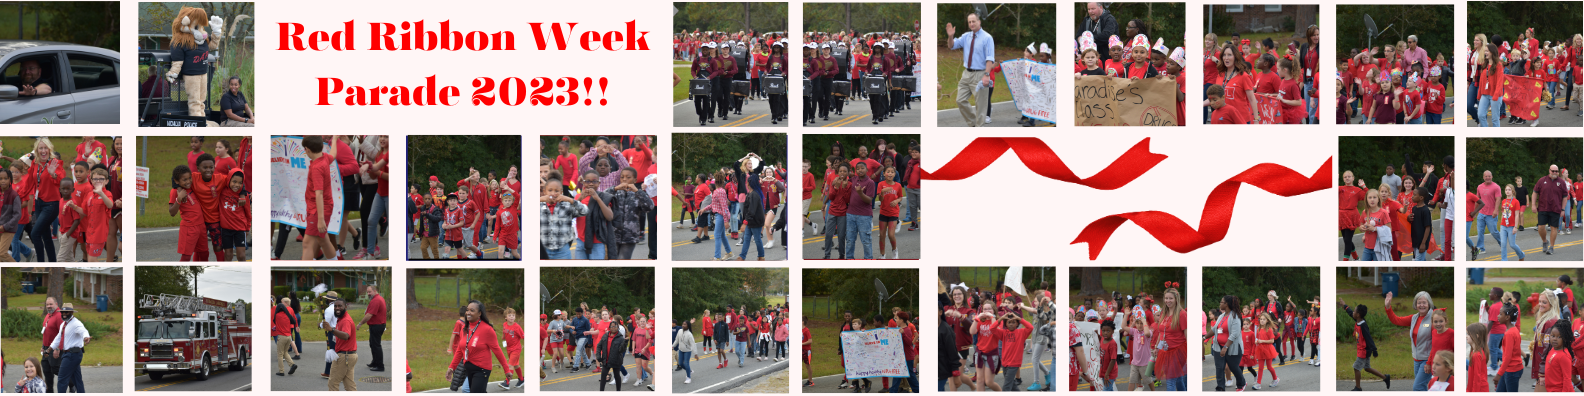 Red Ribbon Week Banner w/Pictures